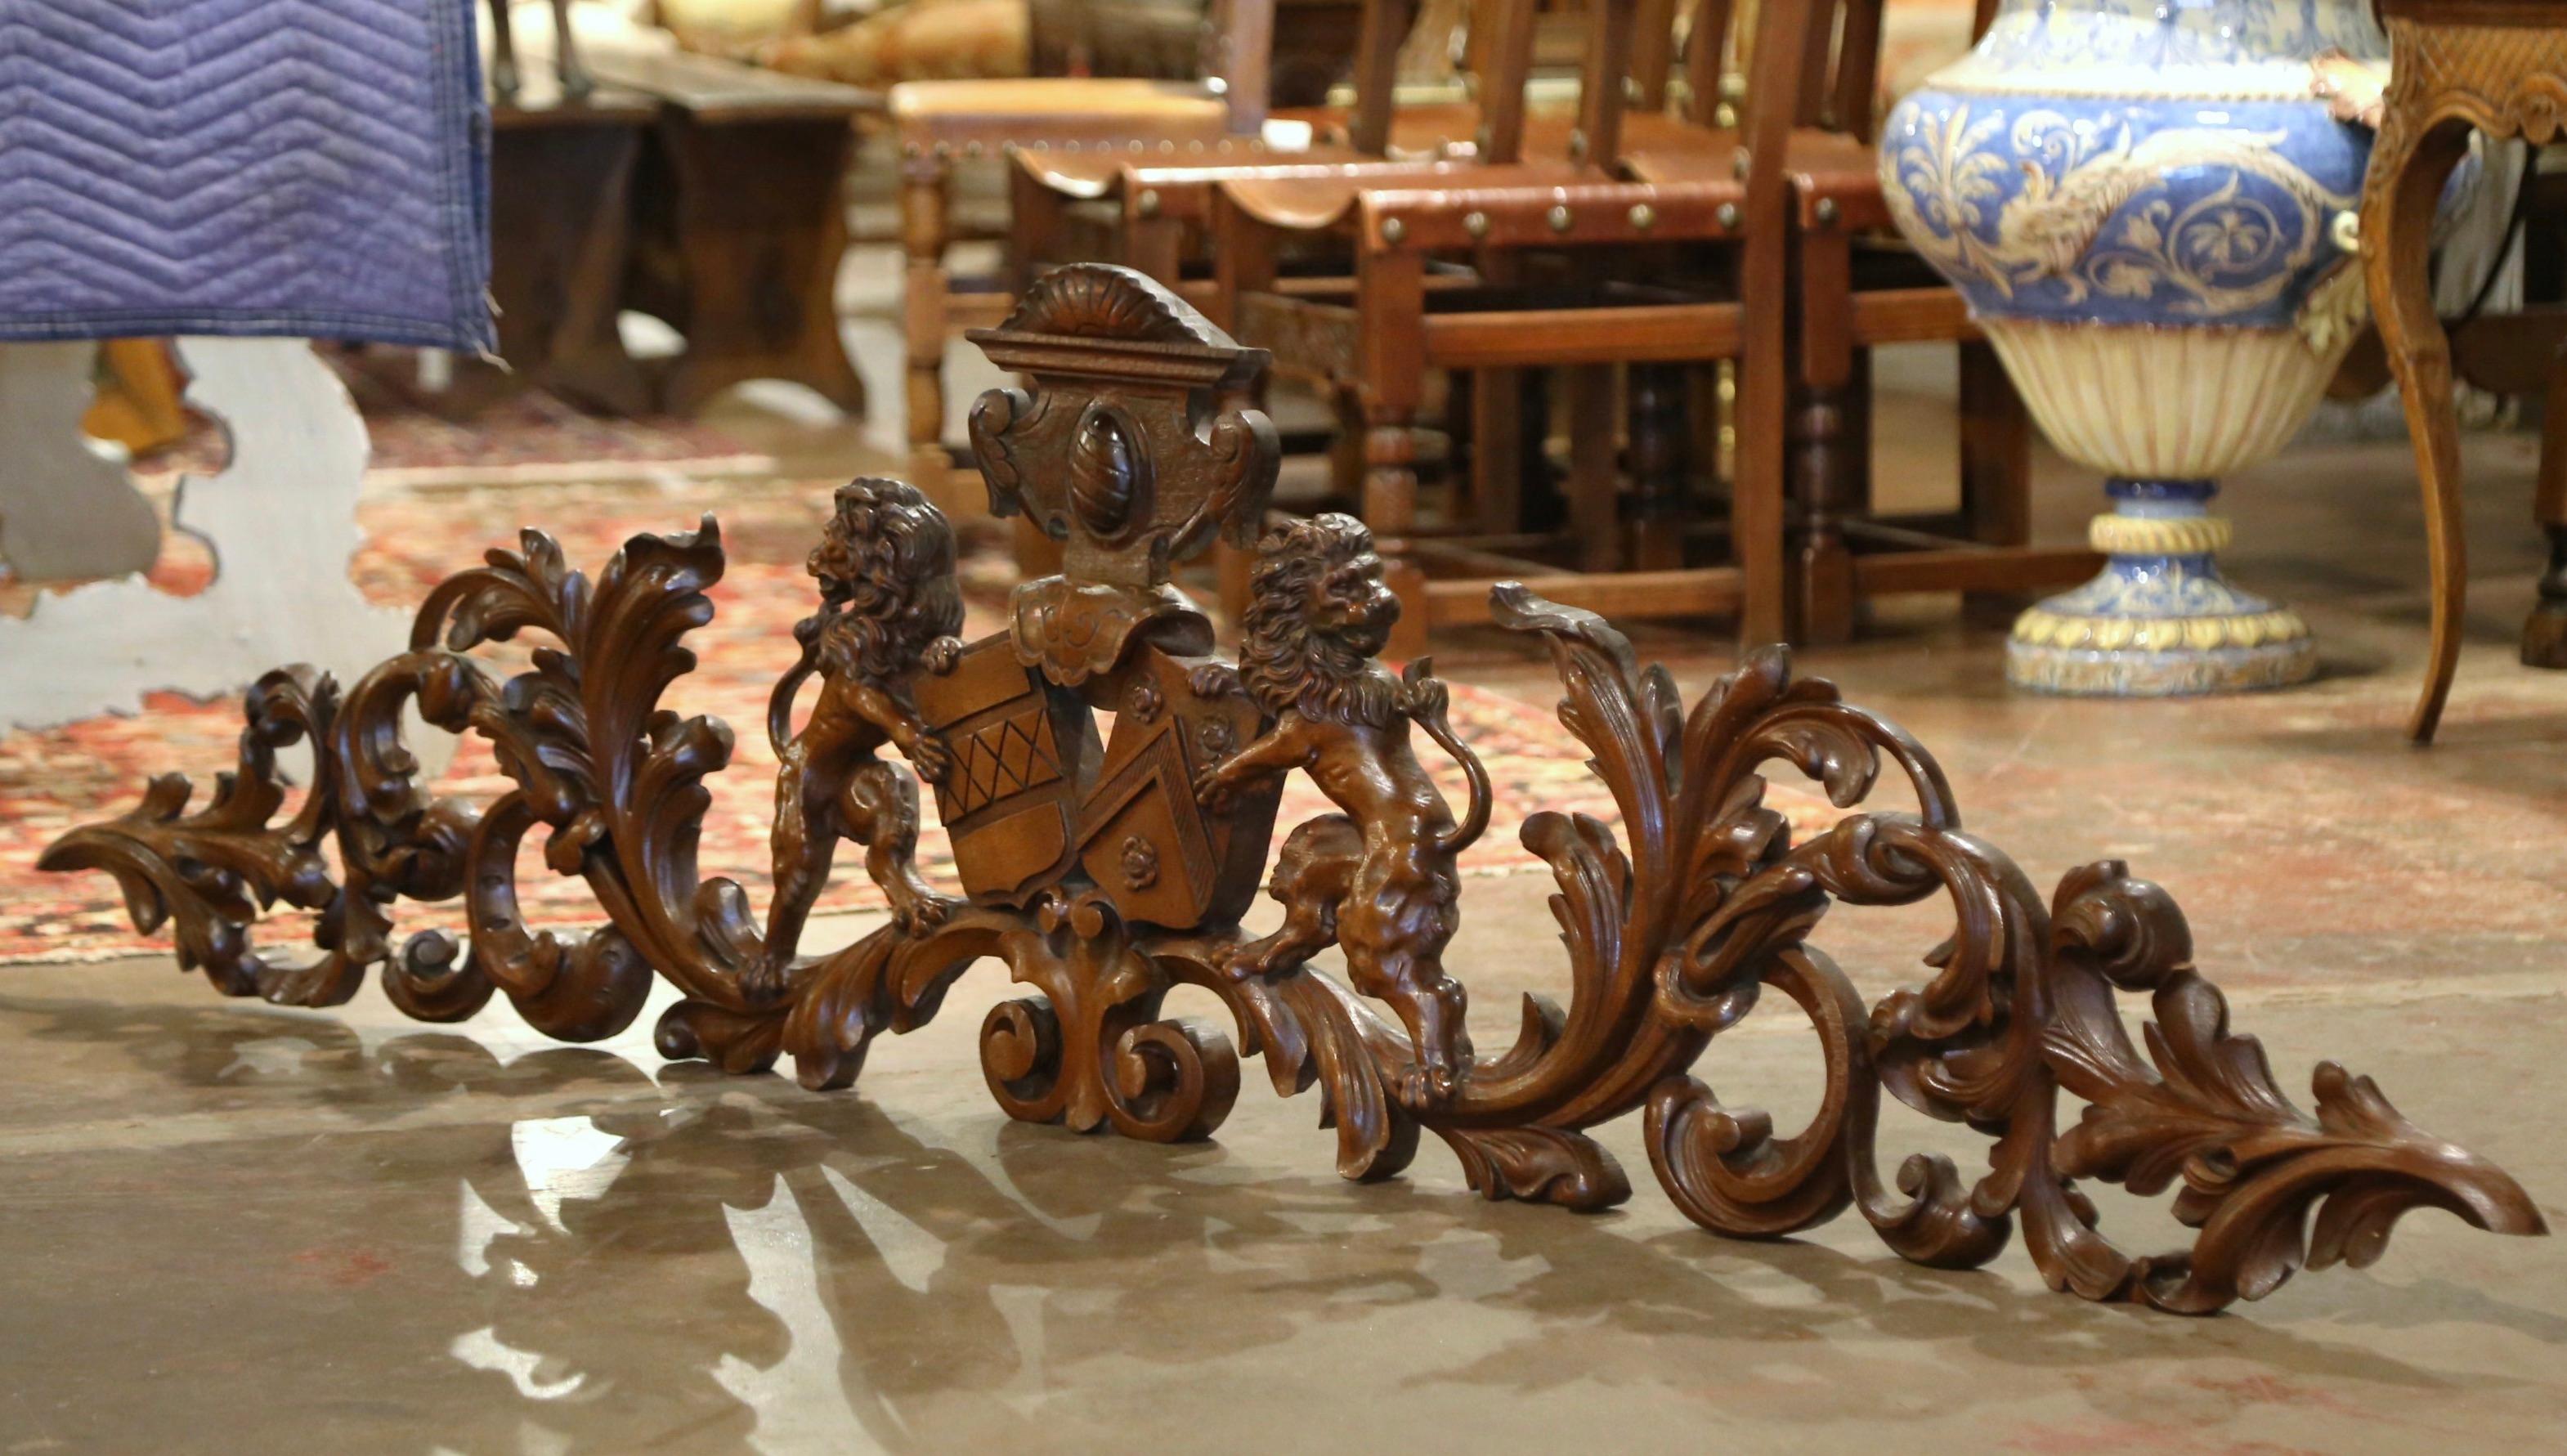  Crafted in France circa 1860 and built of solid walnut, the large wall hanging sculpture features heavily carved motifs throughout including hand carved lion figures holding a family crest on both sides; it is further embellished with acanthus